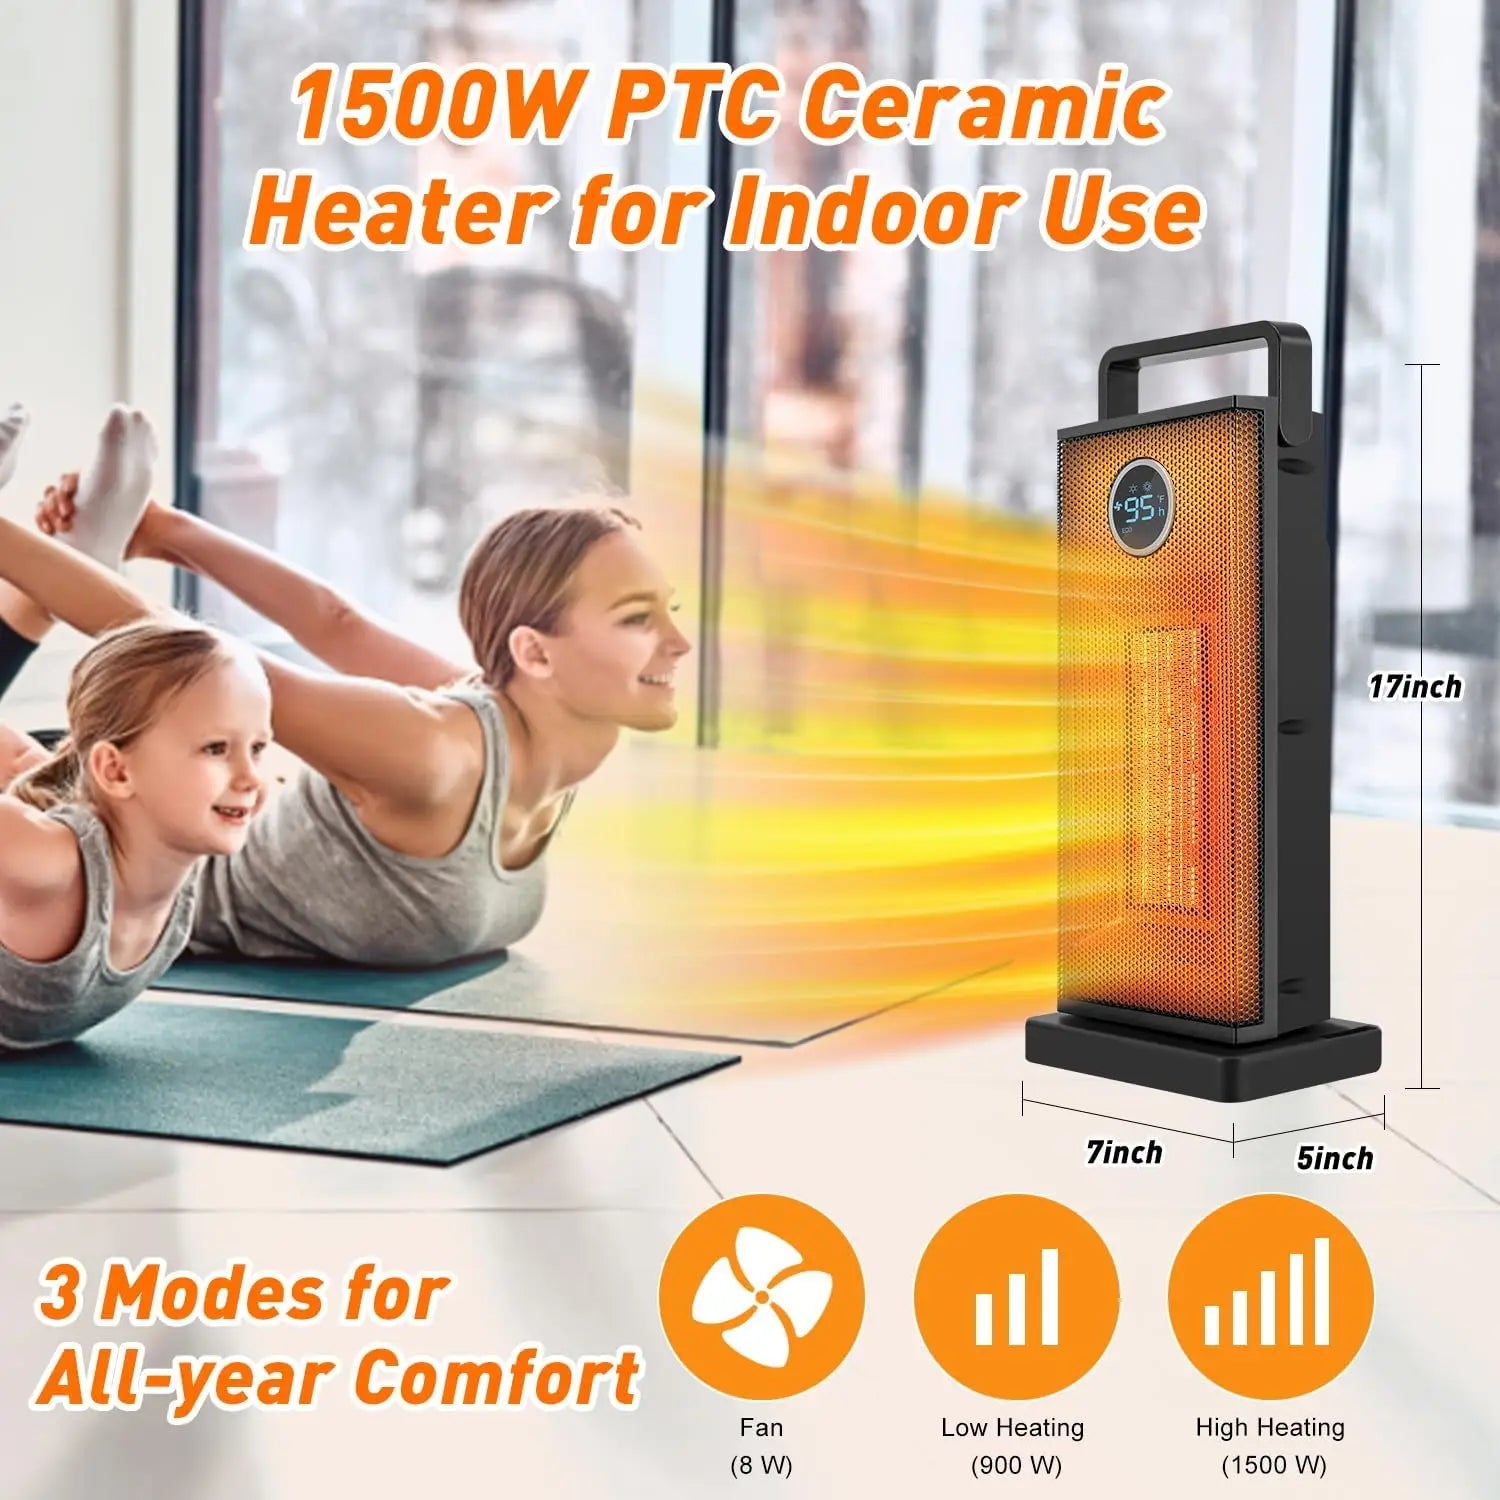 XIAOMI Room Heater 1500W Large Portable Ceramic Tower Heater 12 Hour Timer 3 Modes With Remote Rapid Heating Oscillating Heater